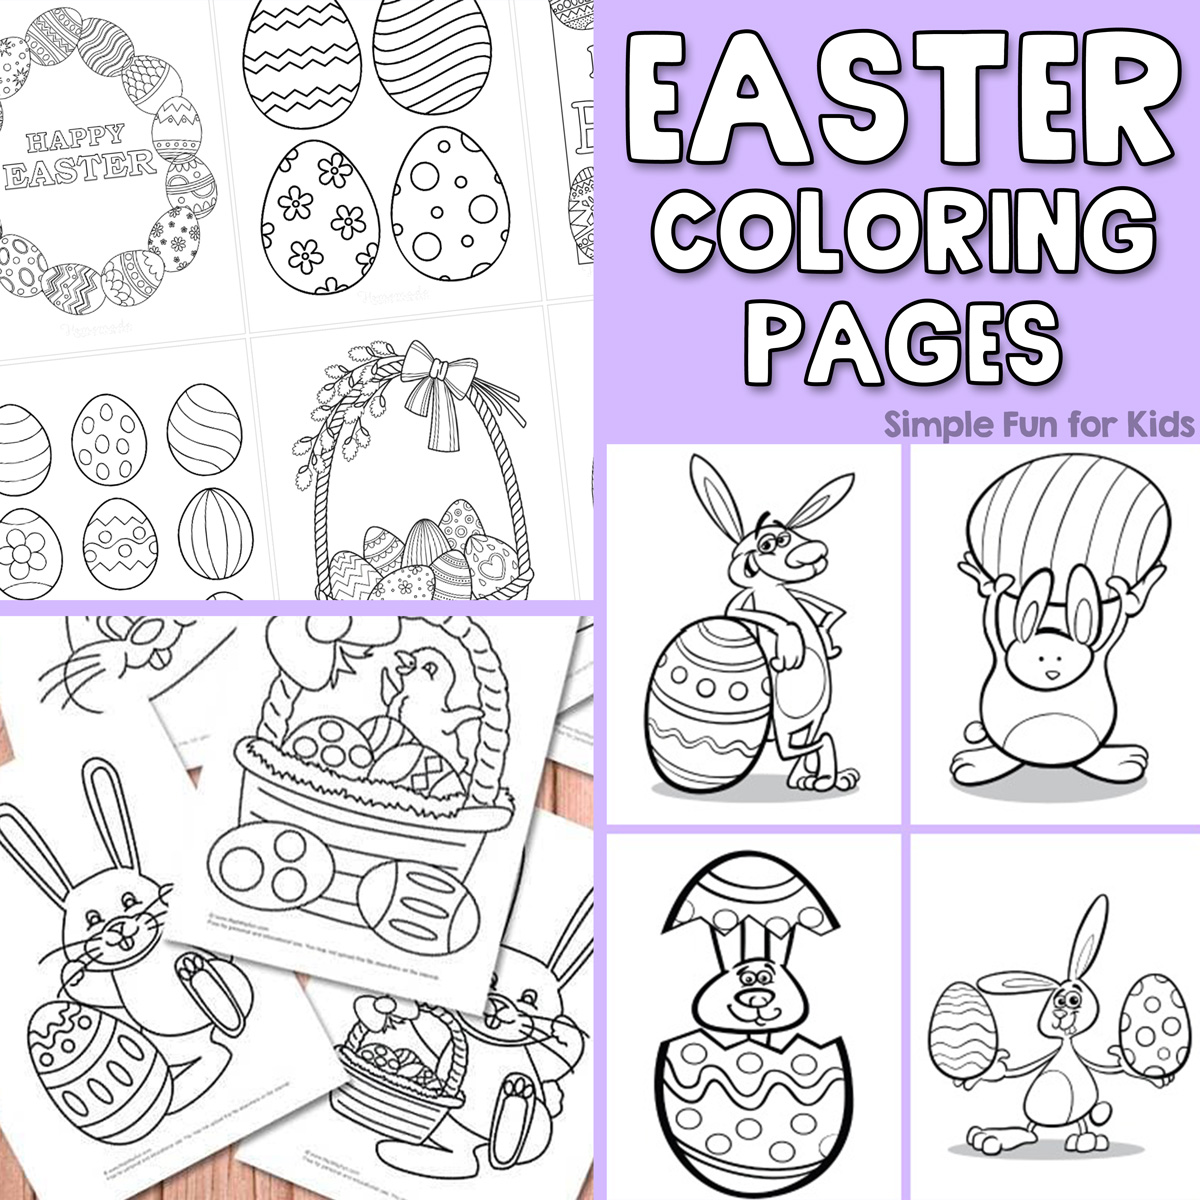 Lots of Easter coloring pages with Easter bunnies, Easter eggs, Easter baskets, and more.